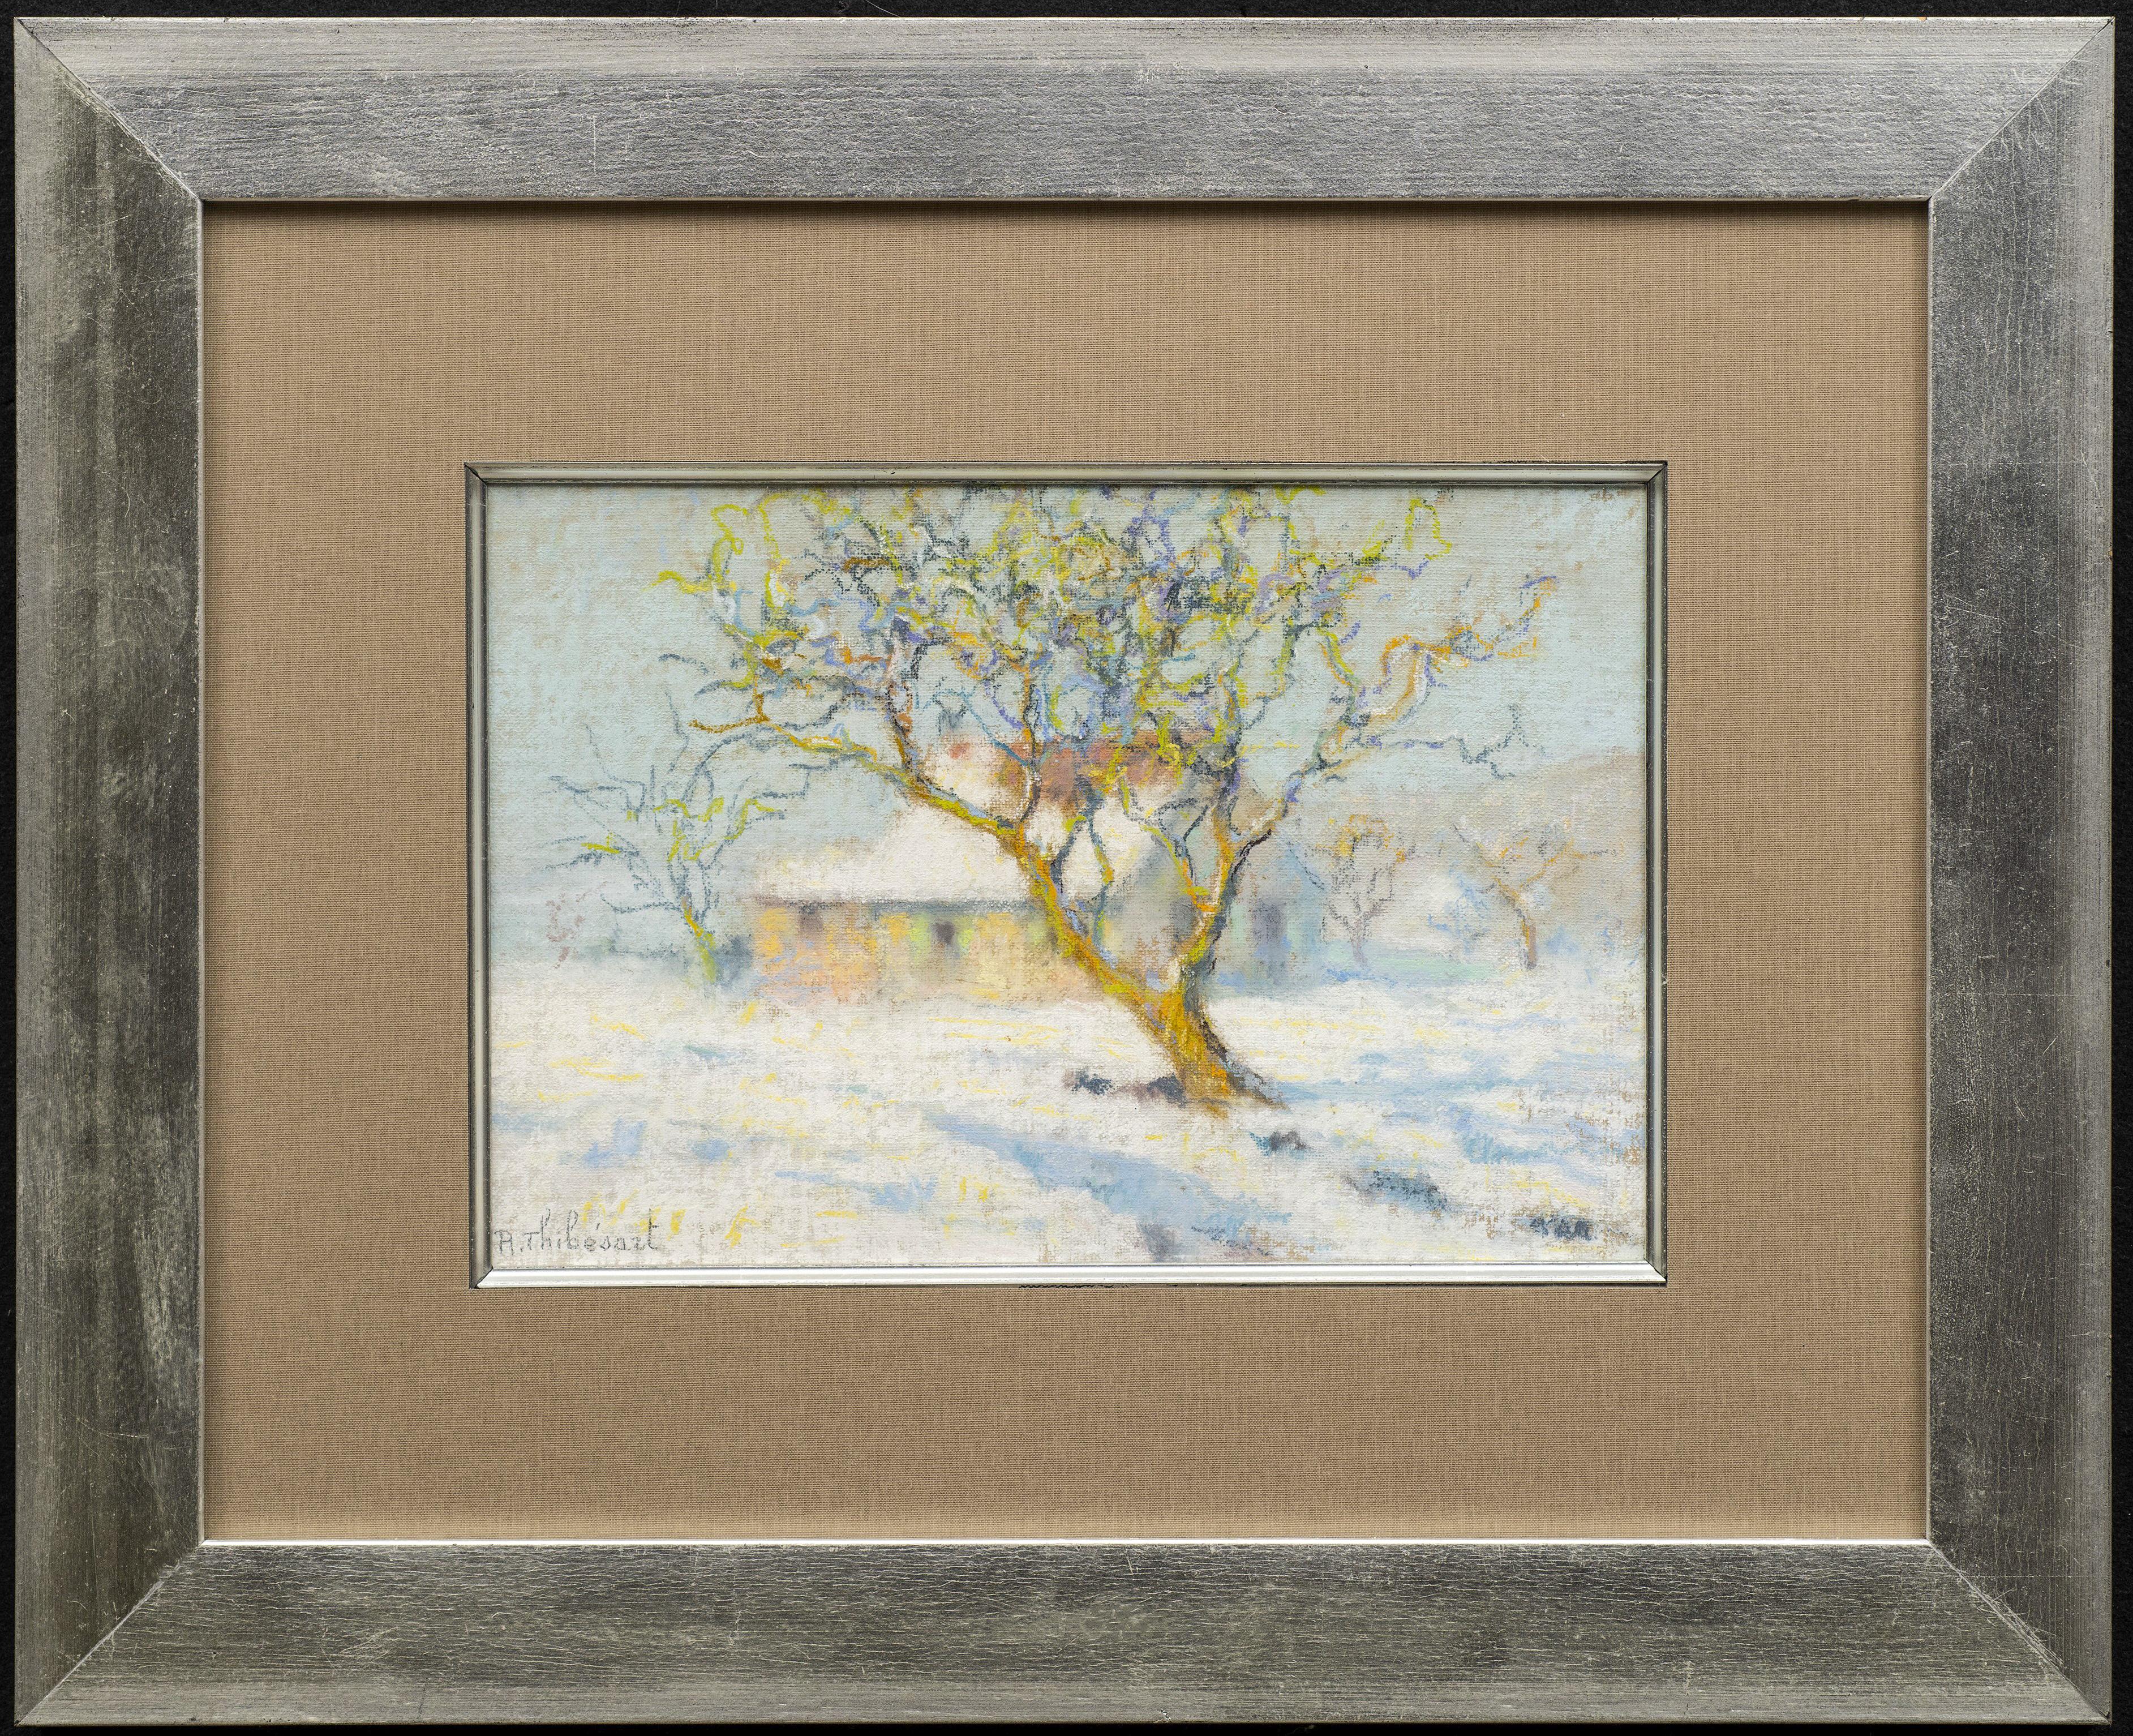 Tree and House Under the Snow (Arbre et Maison Sous la Neige) 
Raymond Thibesart (France, 1874-1968)
Pastel on canvas, circa 1920s
9 1/2 x 12 ( 14 x 17 1/2 framed) inches

This is a little bit different for Thibesart in that he didn't paint a lot of